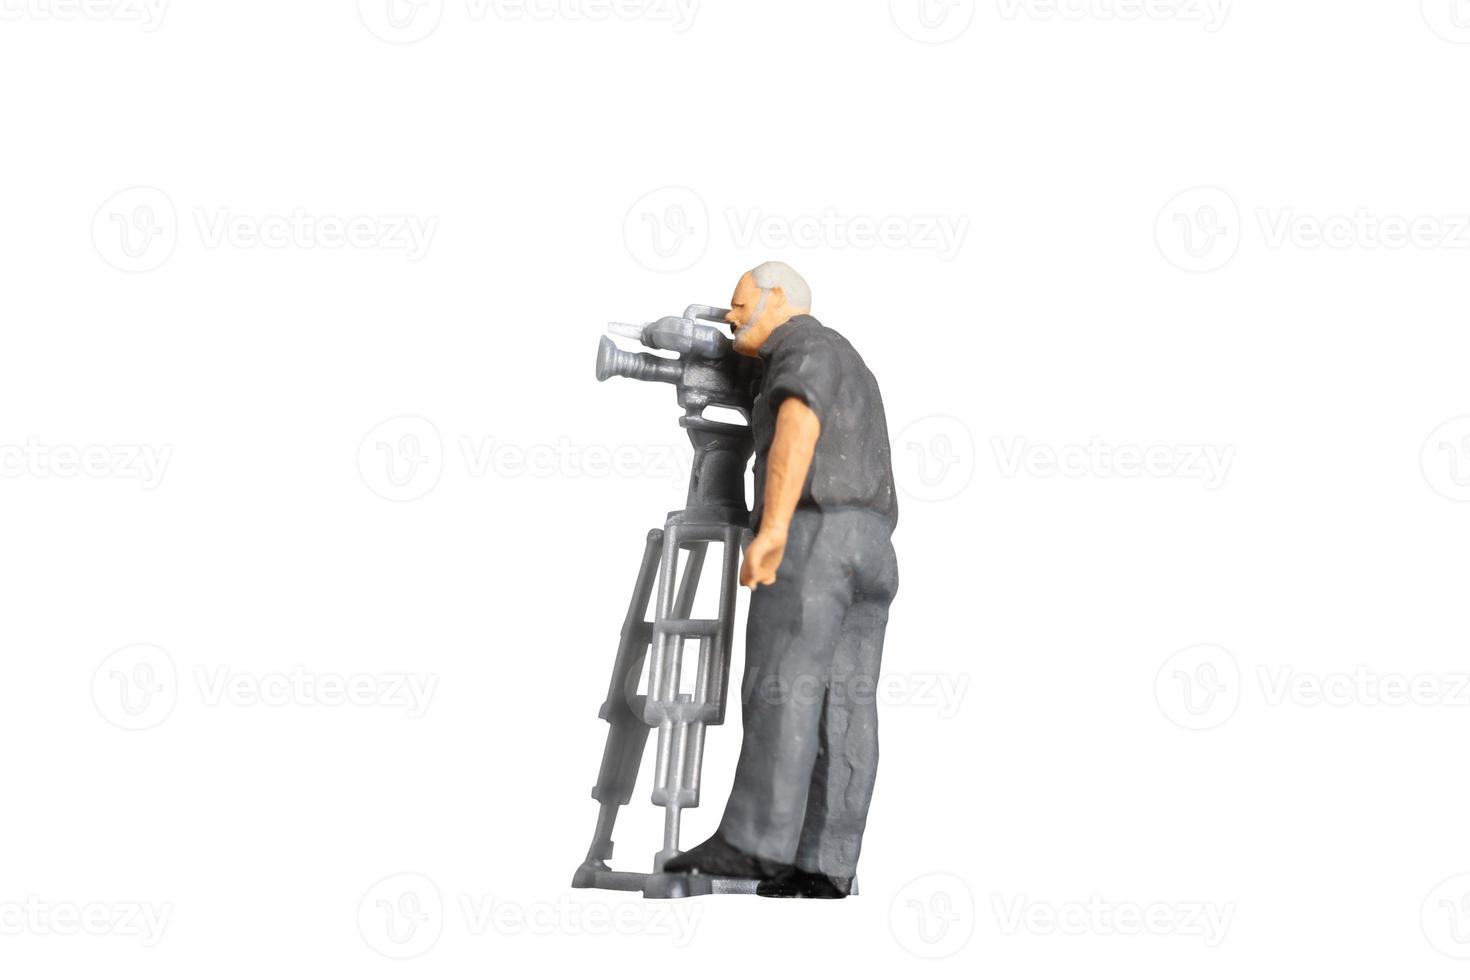 Cameraman working with television camera on a tripod isolated on white background with clipping path photo